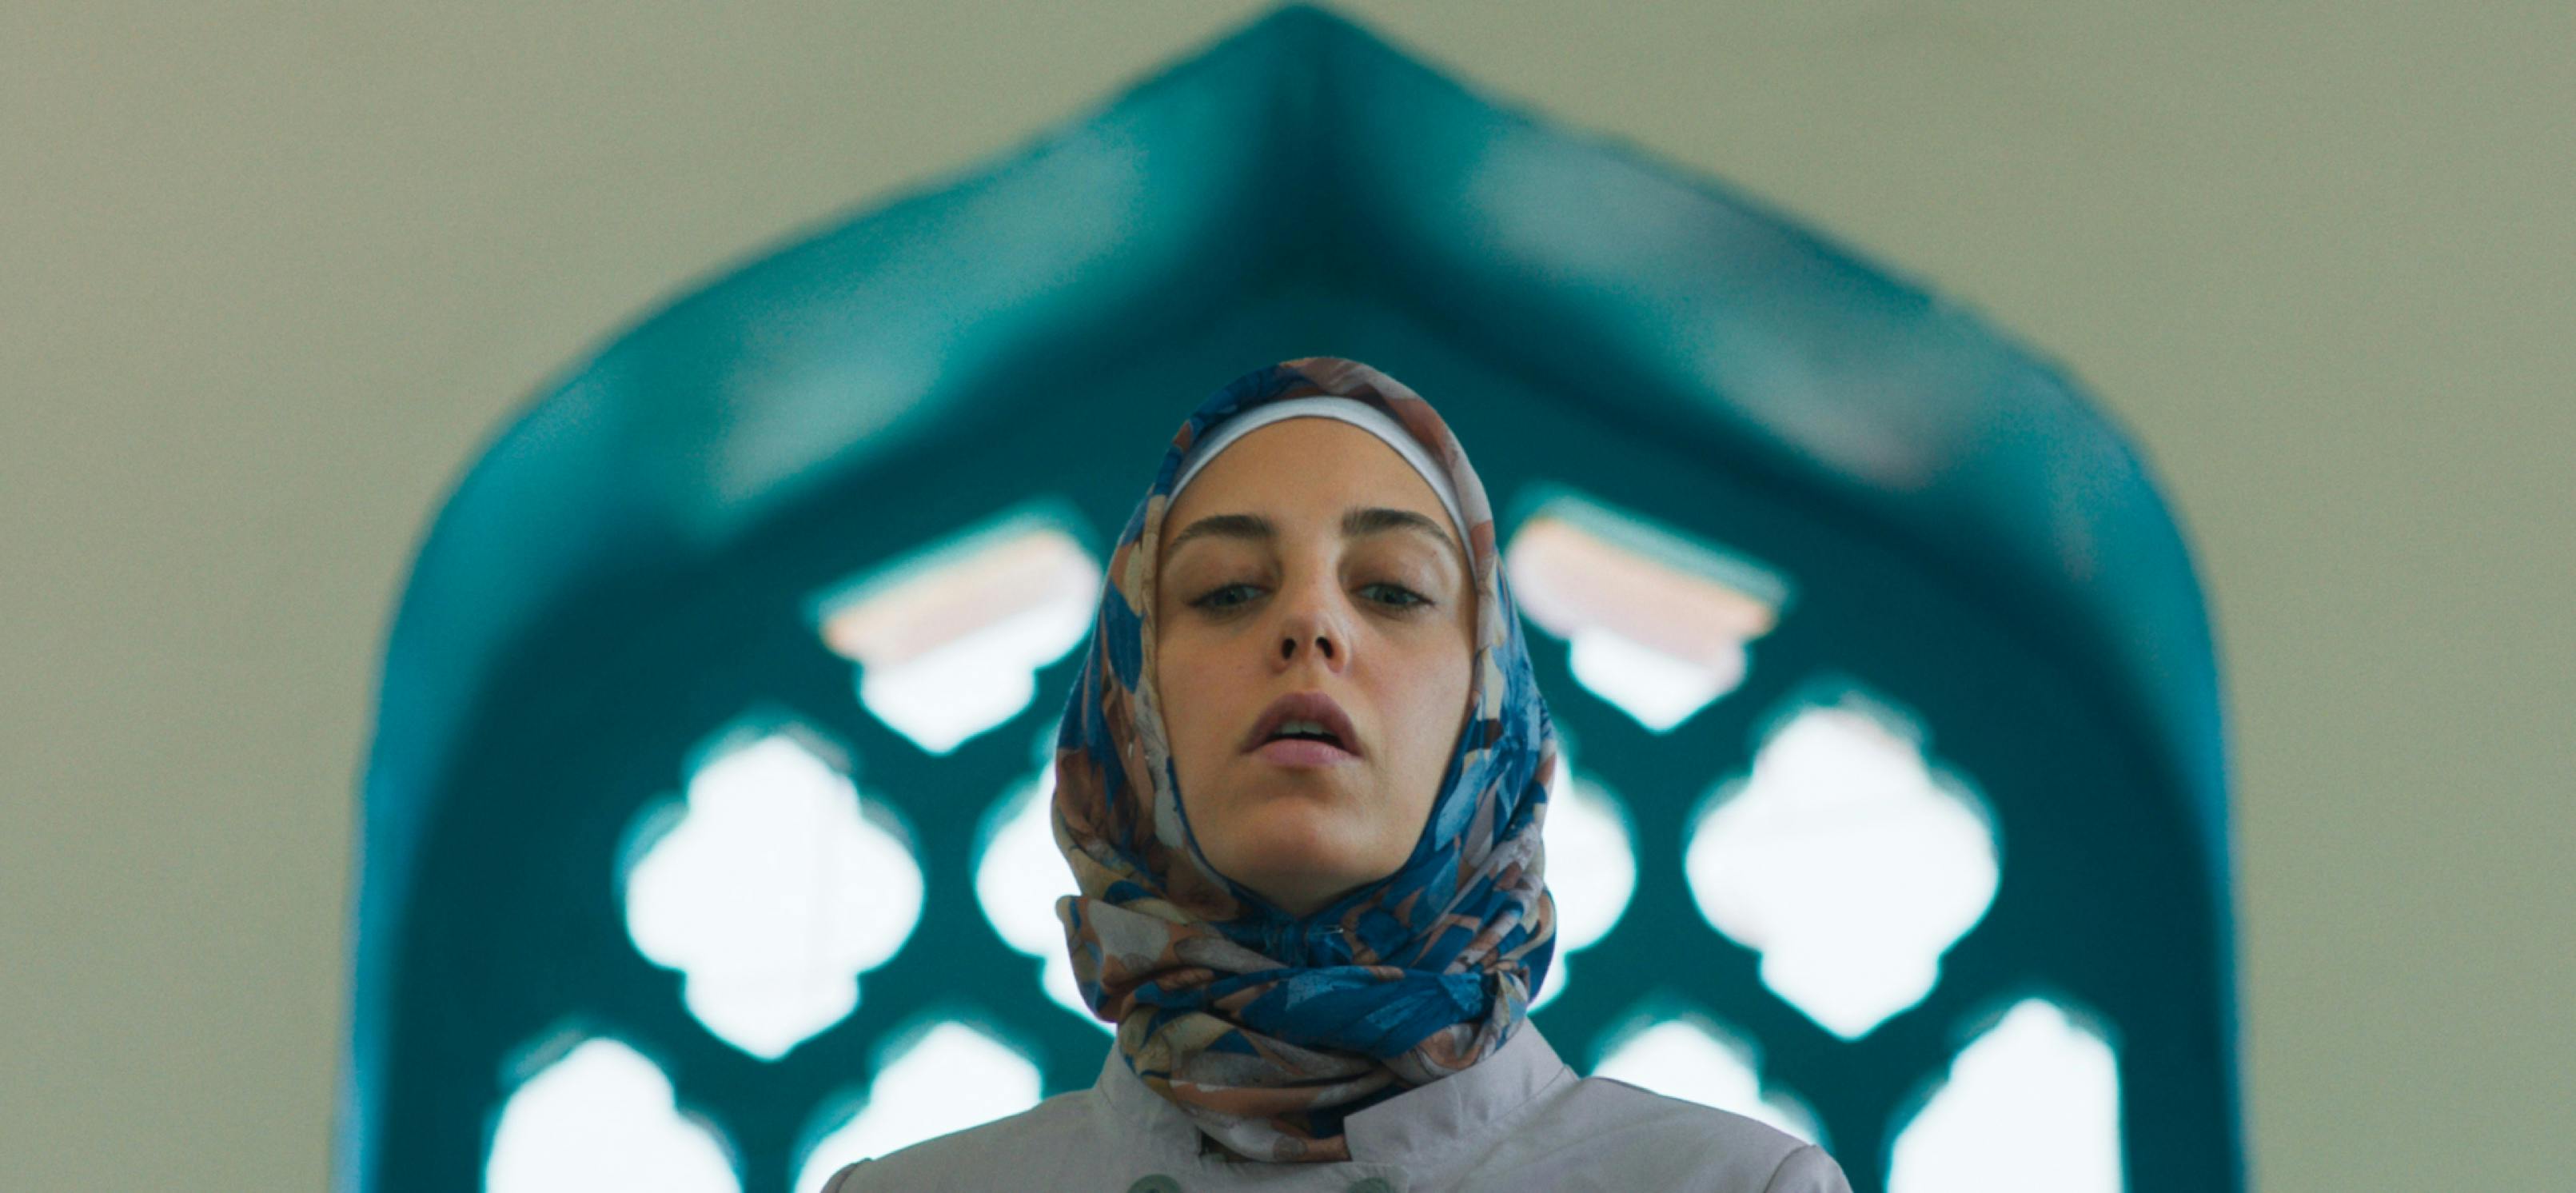 Meryem (actor Öykü Karayel) is framed from the shoulders up against a blue-framed arched window in this shot from Ethos. She wears a headscarf whose turquoise accents blend with the architecture behind her. 